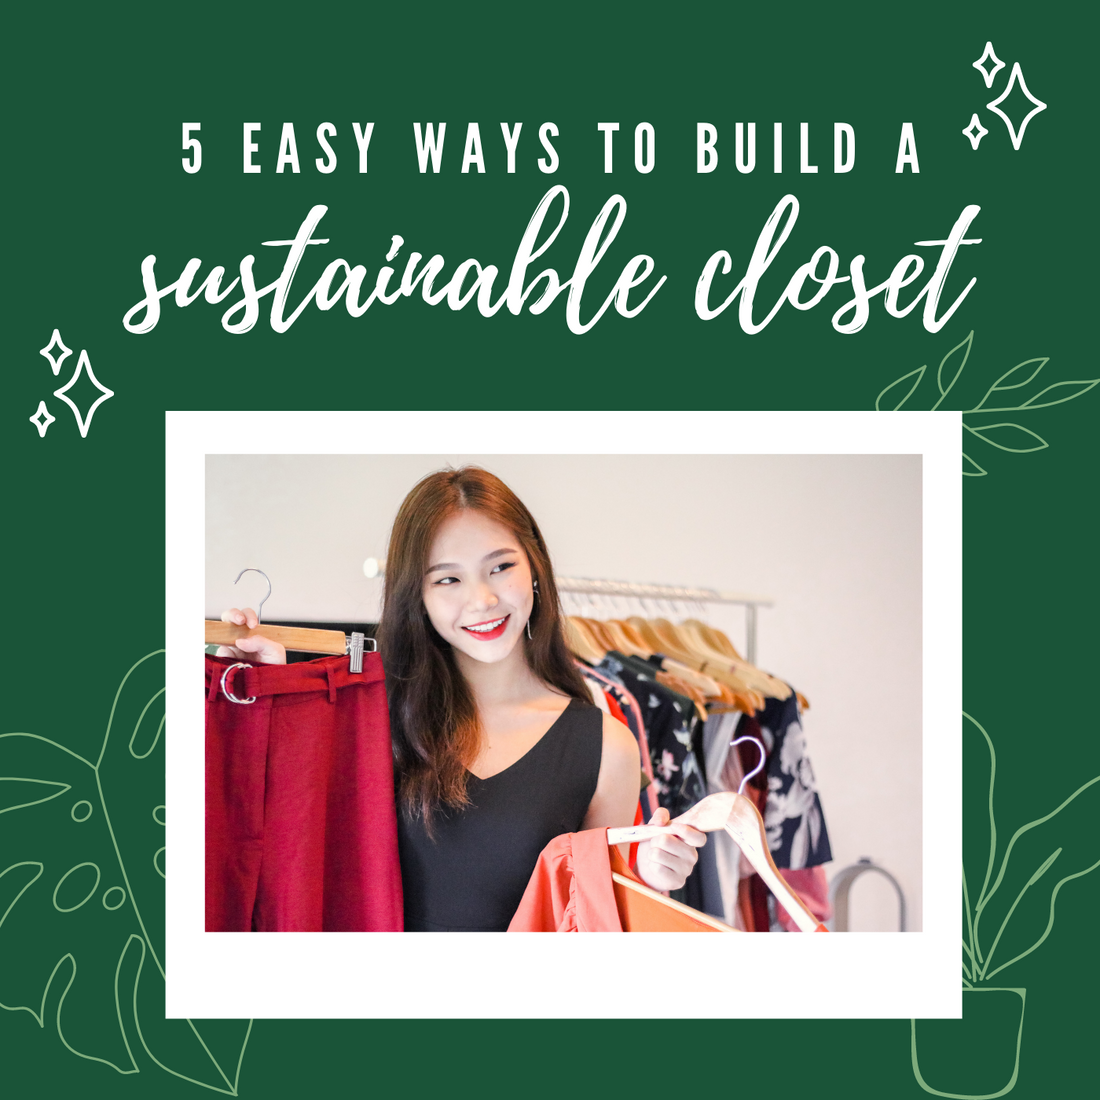 5 EASY WAYS TO BUILD A SUSTAINABLE CLOSET